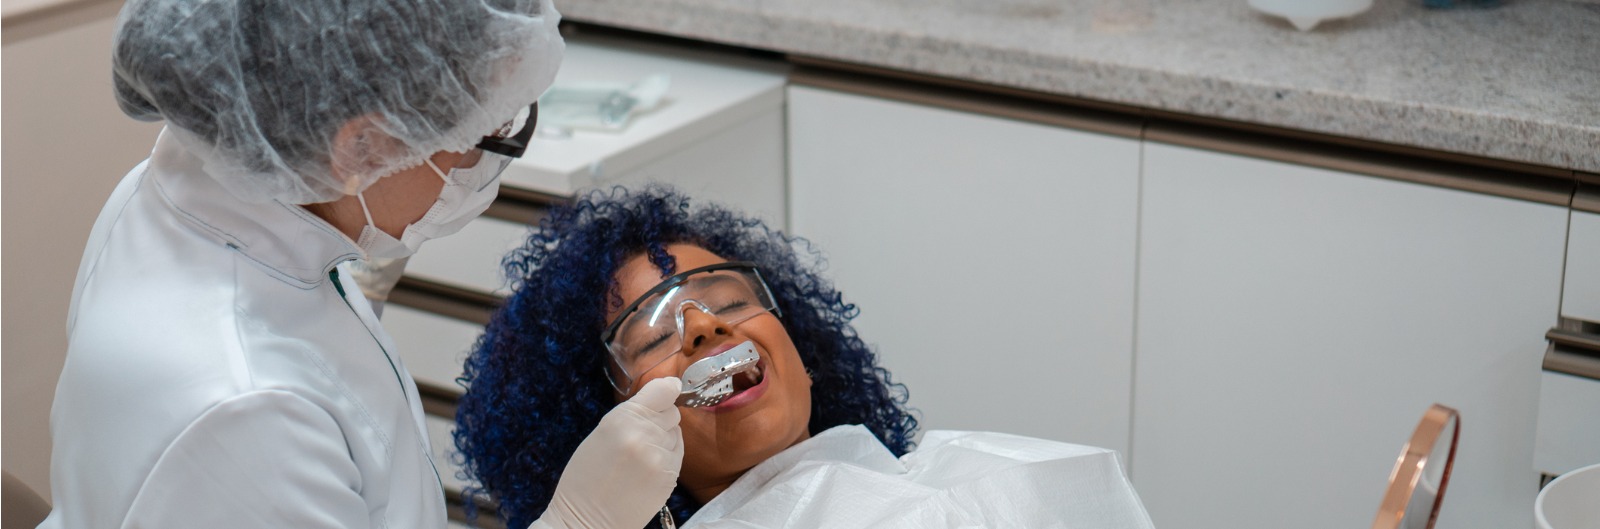 dentist-testing-dental-mold-on-patient-picture-1600x529.jpg